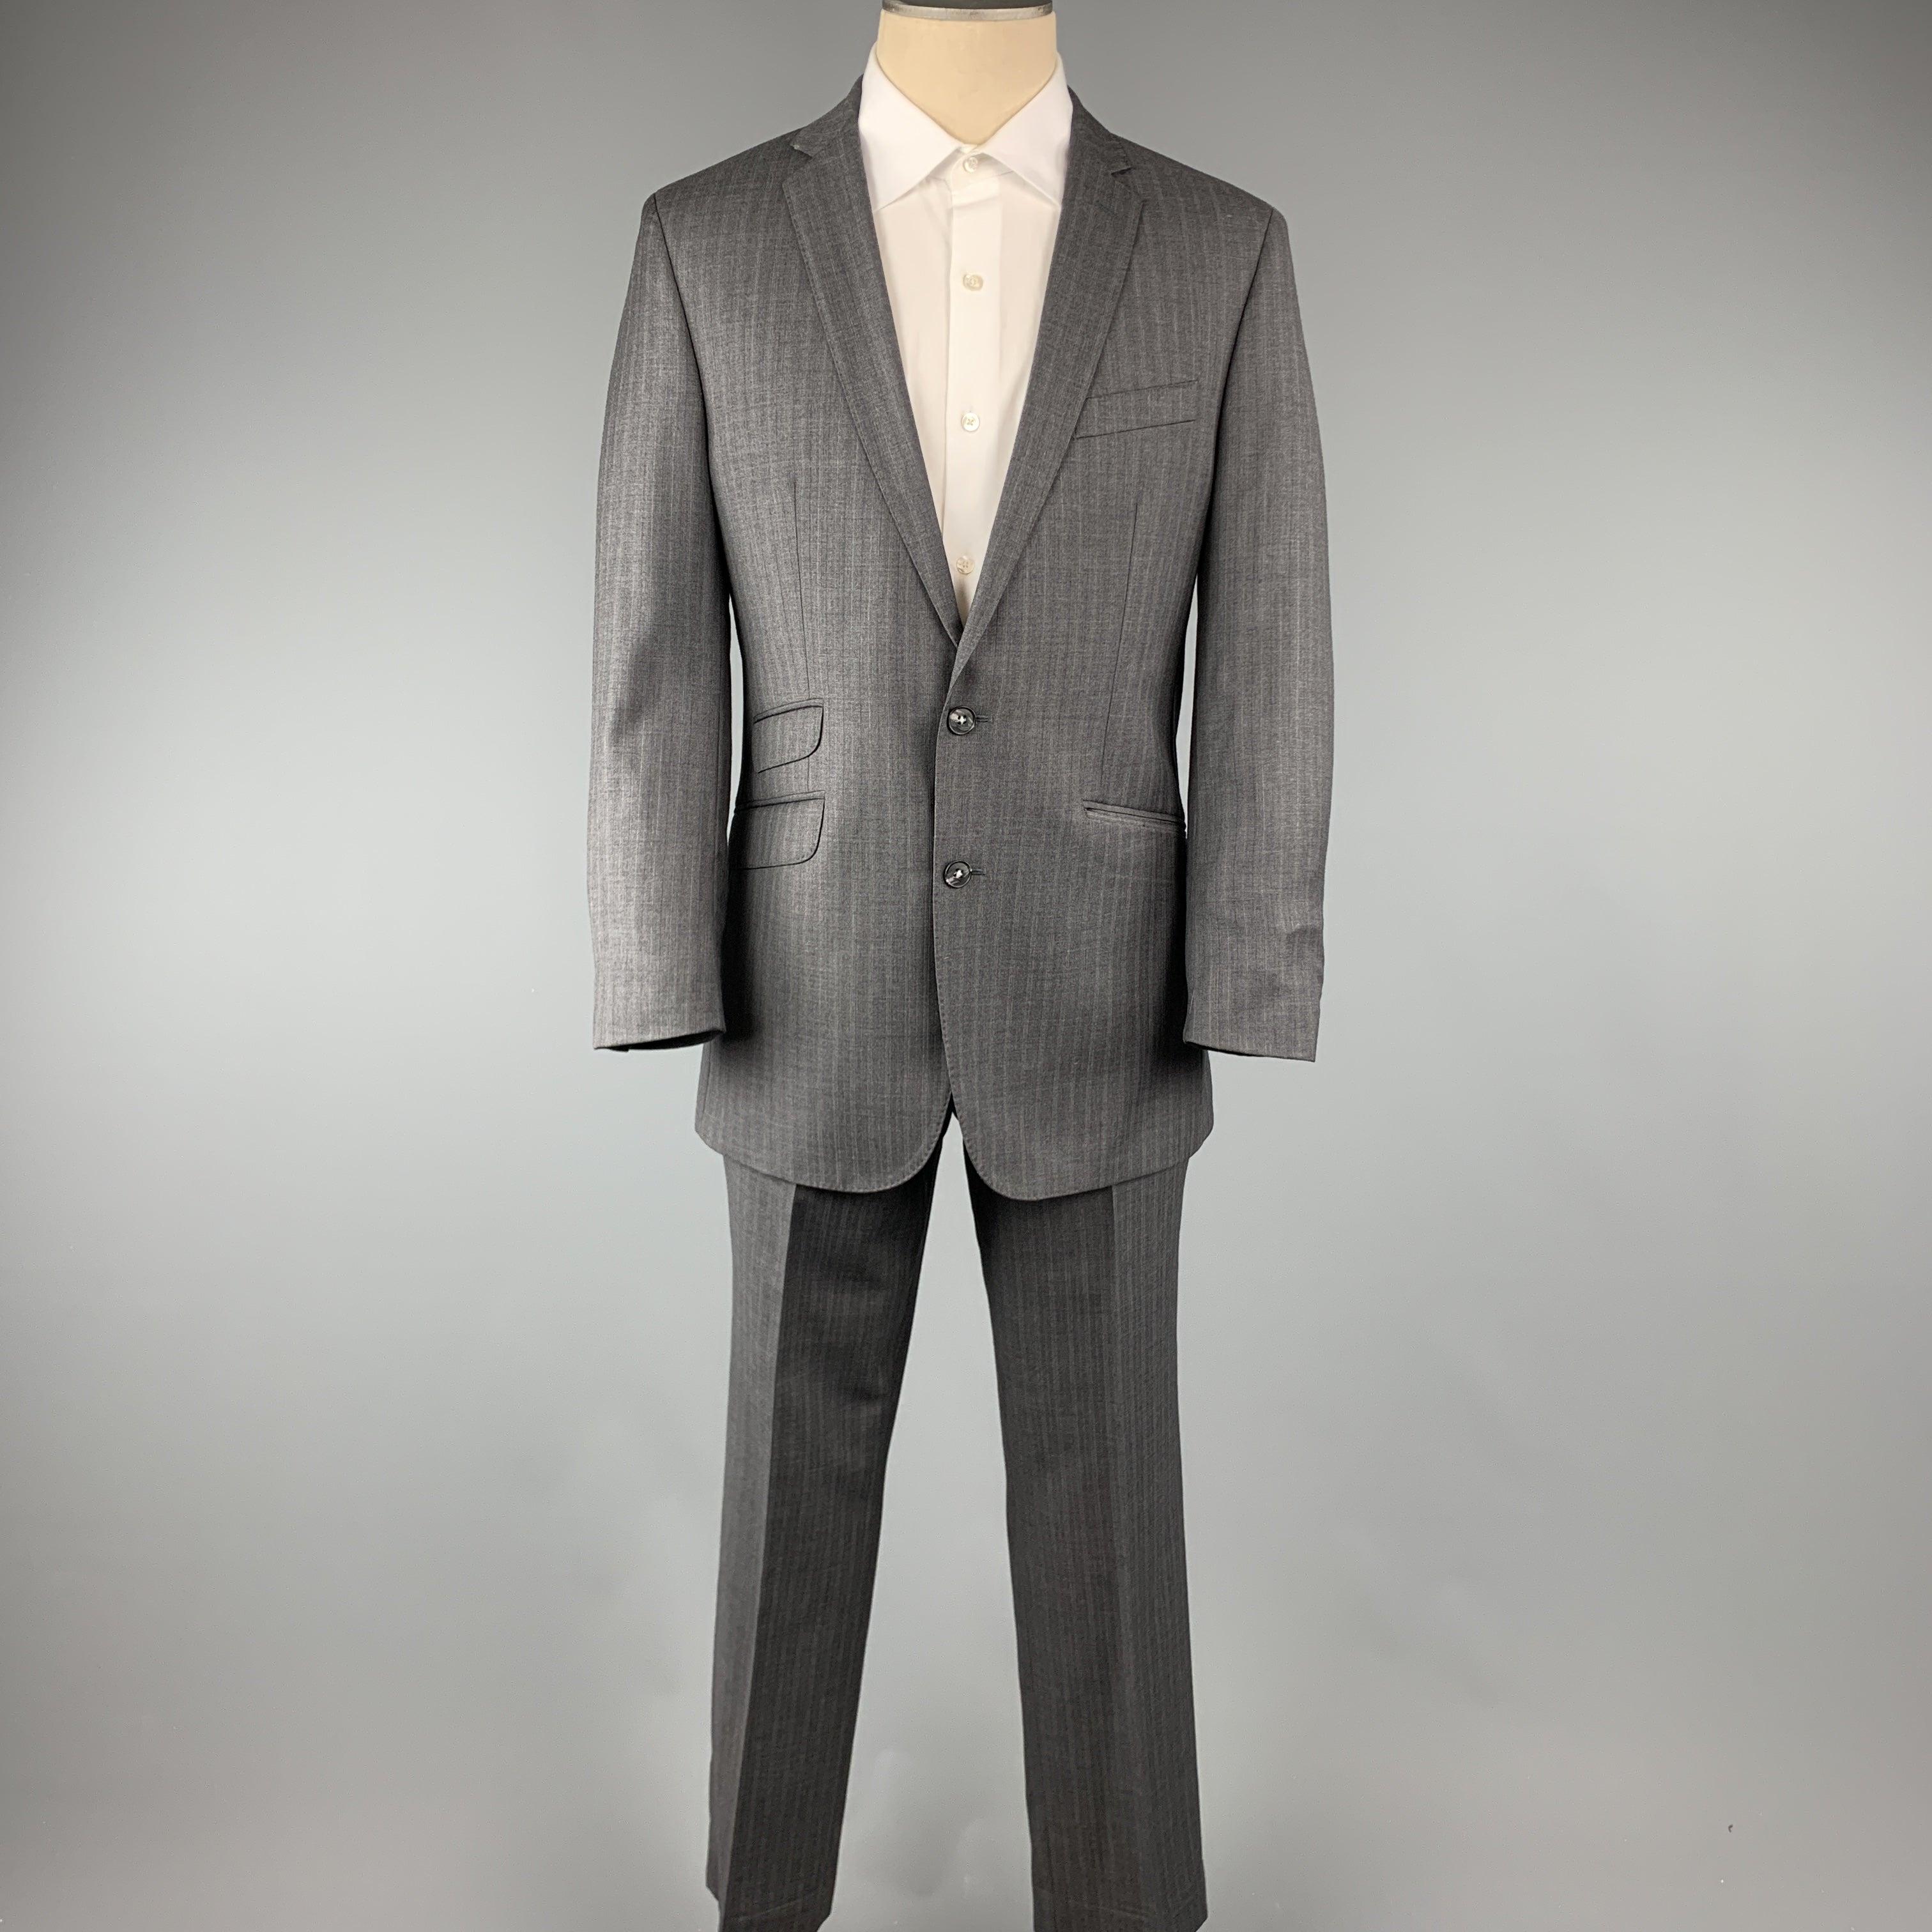 BEN SHERMAN suit comes in a gray stripe wool and includes a single breasted, 
two button sport coat with a notch lapel and matching front trousers. Excellent Pre-Owned Condition. 

Marked:   40 

Measurements: 
  JacketShoulder: 18.5 inches  Chest: